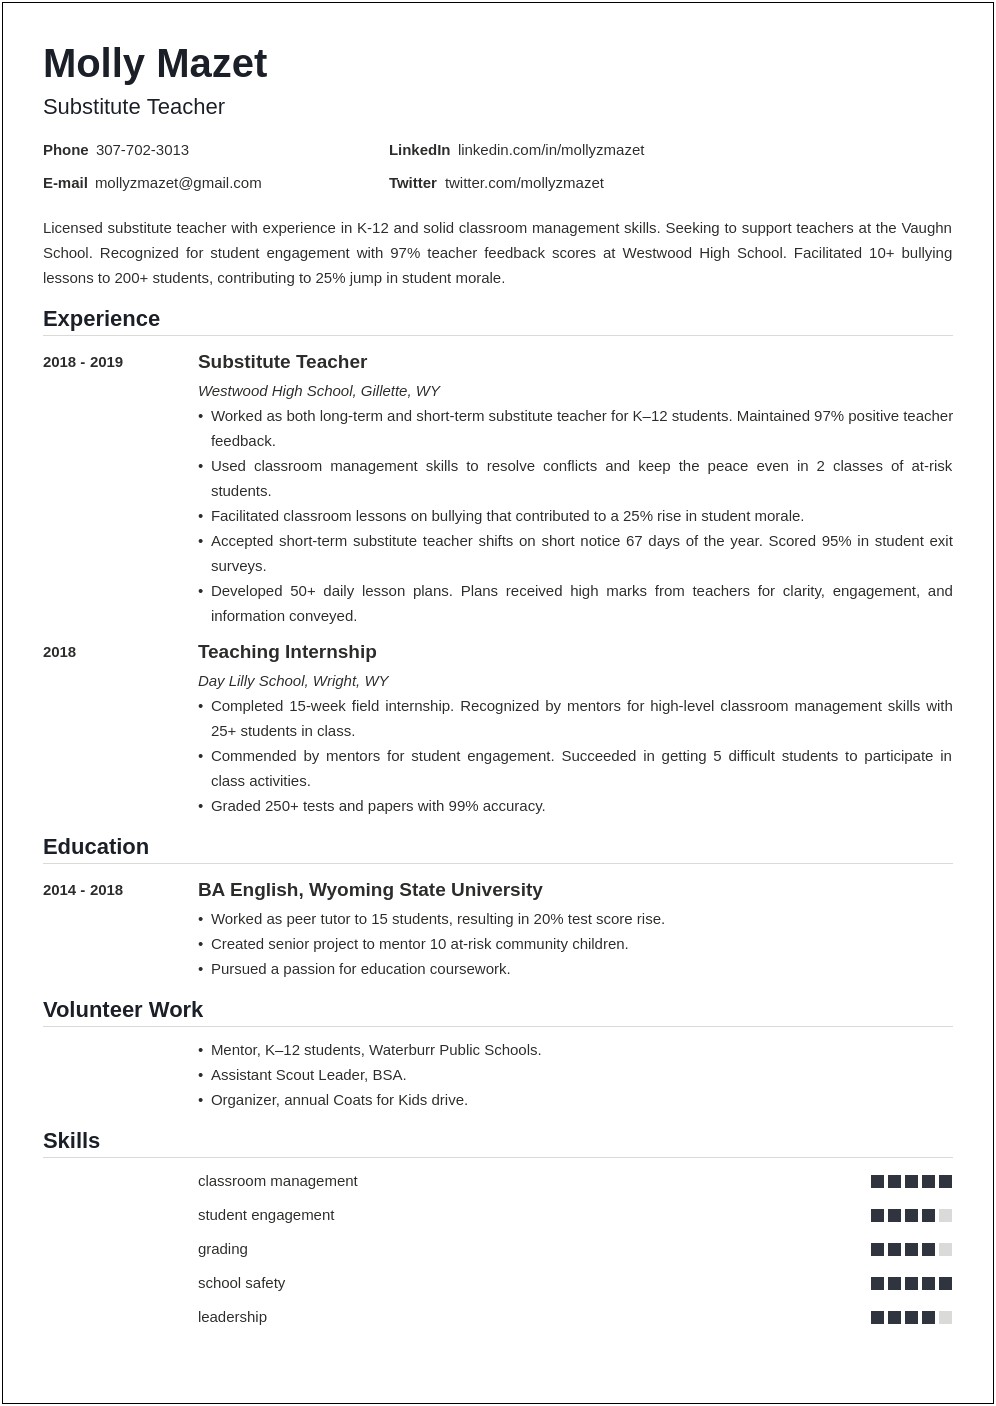 Resume For A Substitute Teacher With No Experience